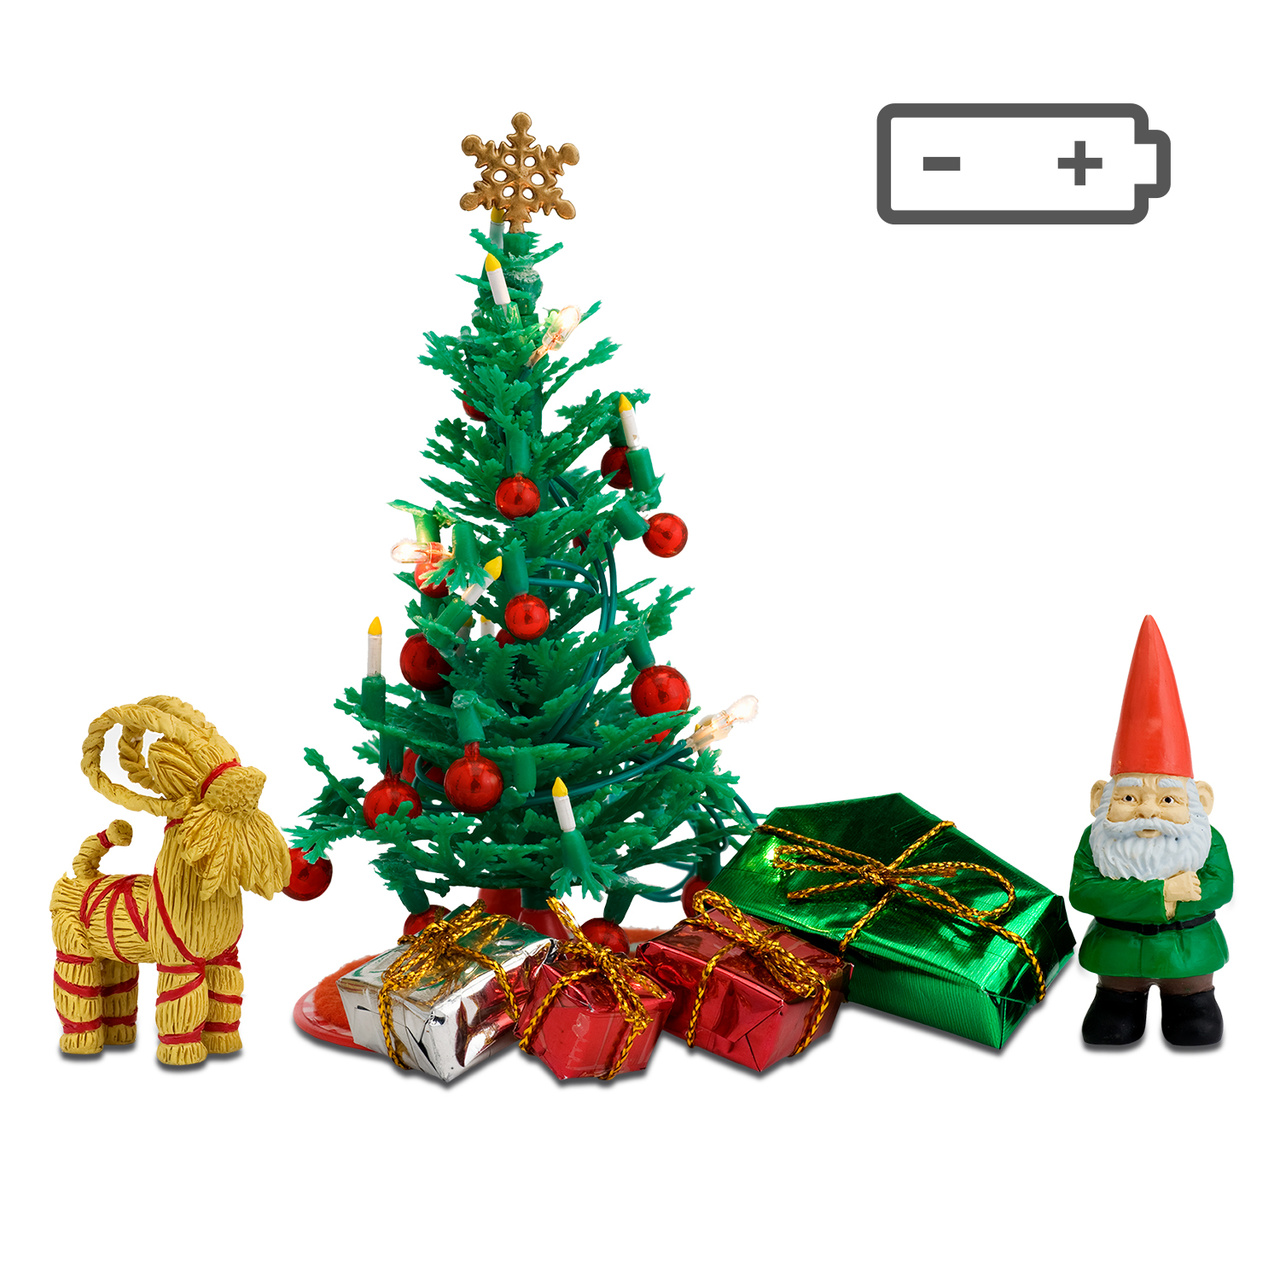 Doll house lighting lundby doll house accessories christmas set with lighting